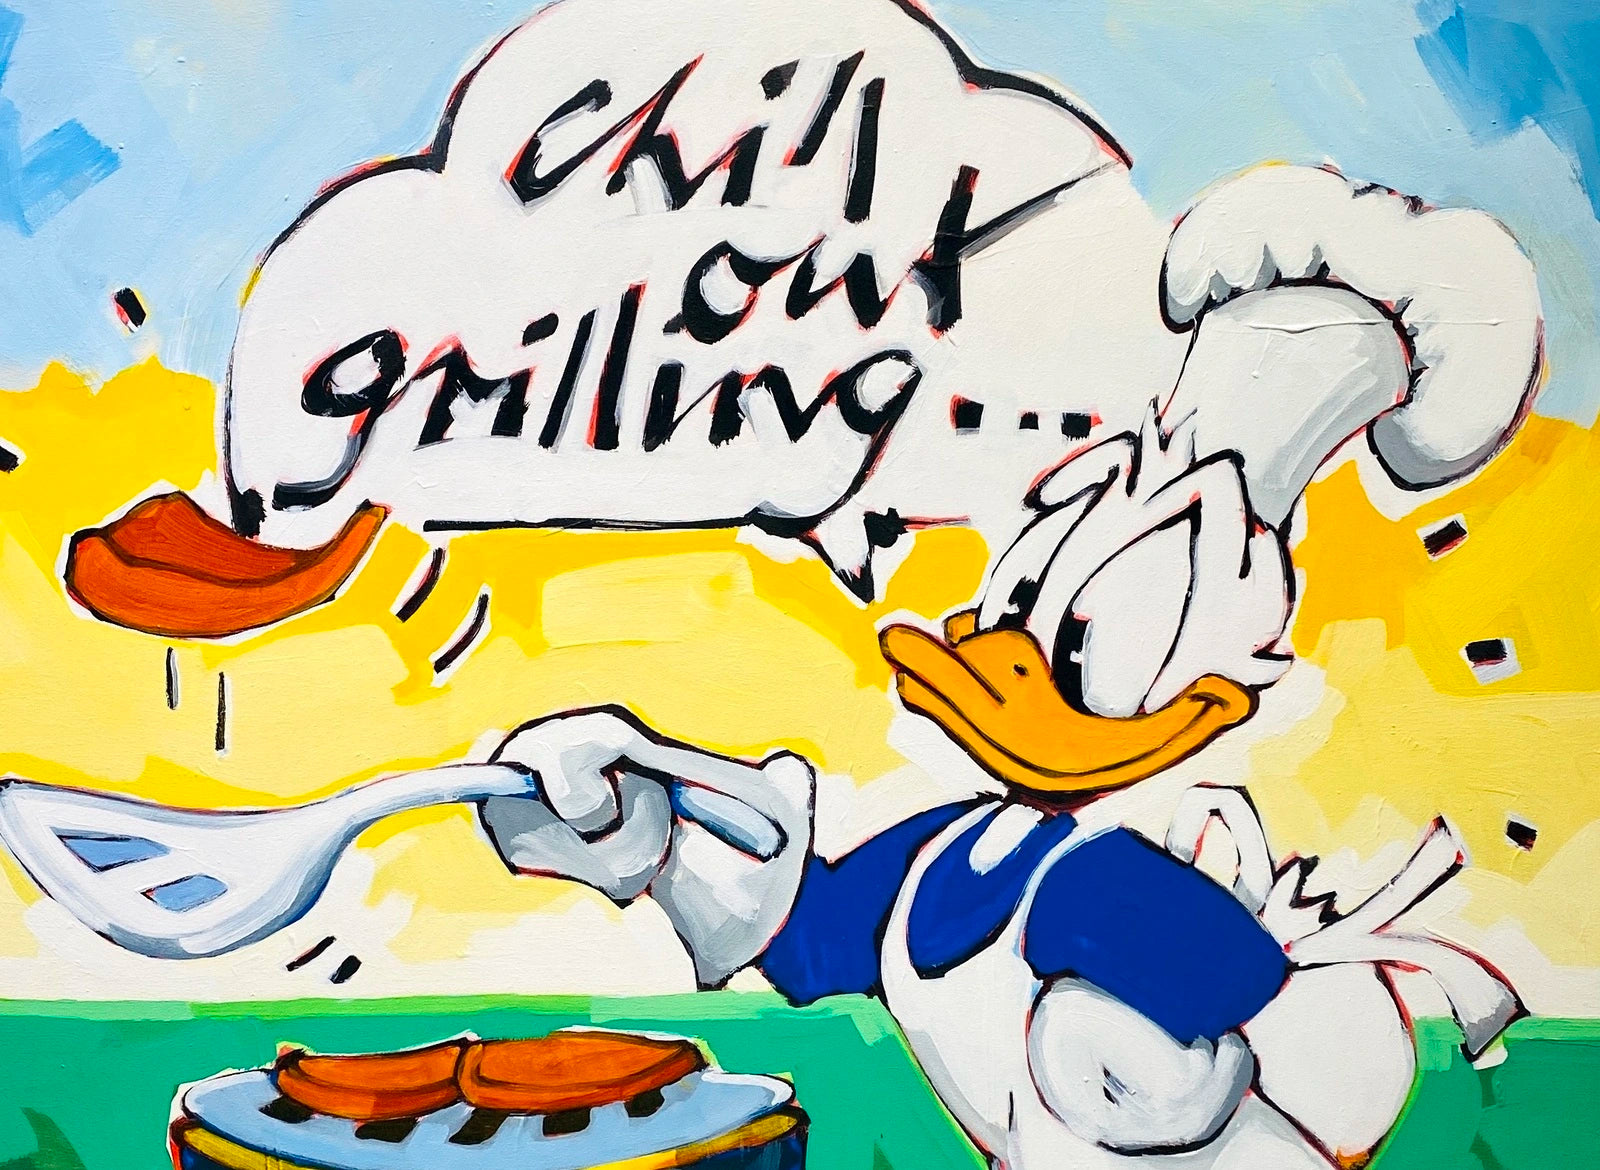 Wolfgang Loesche Donald - chill out grilling on a sunny day